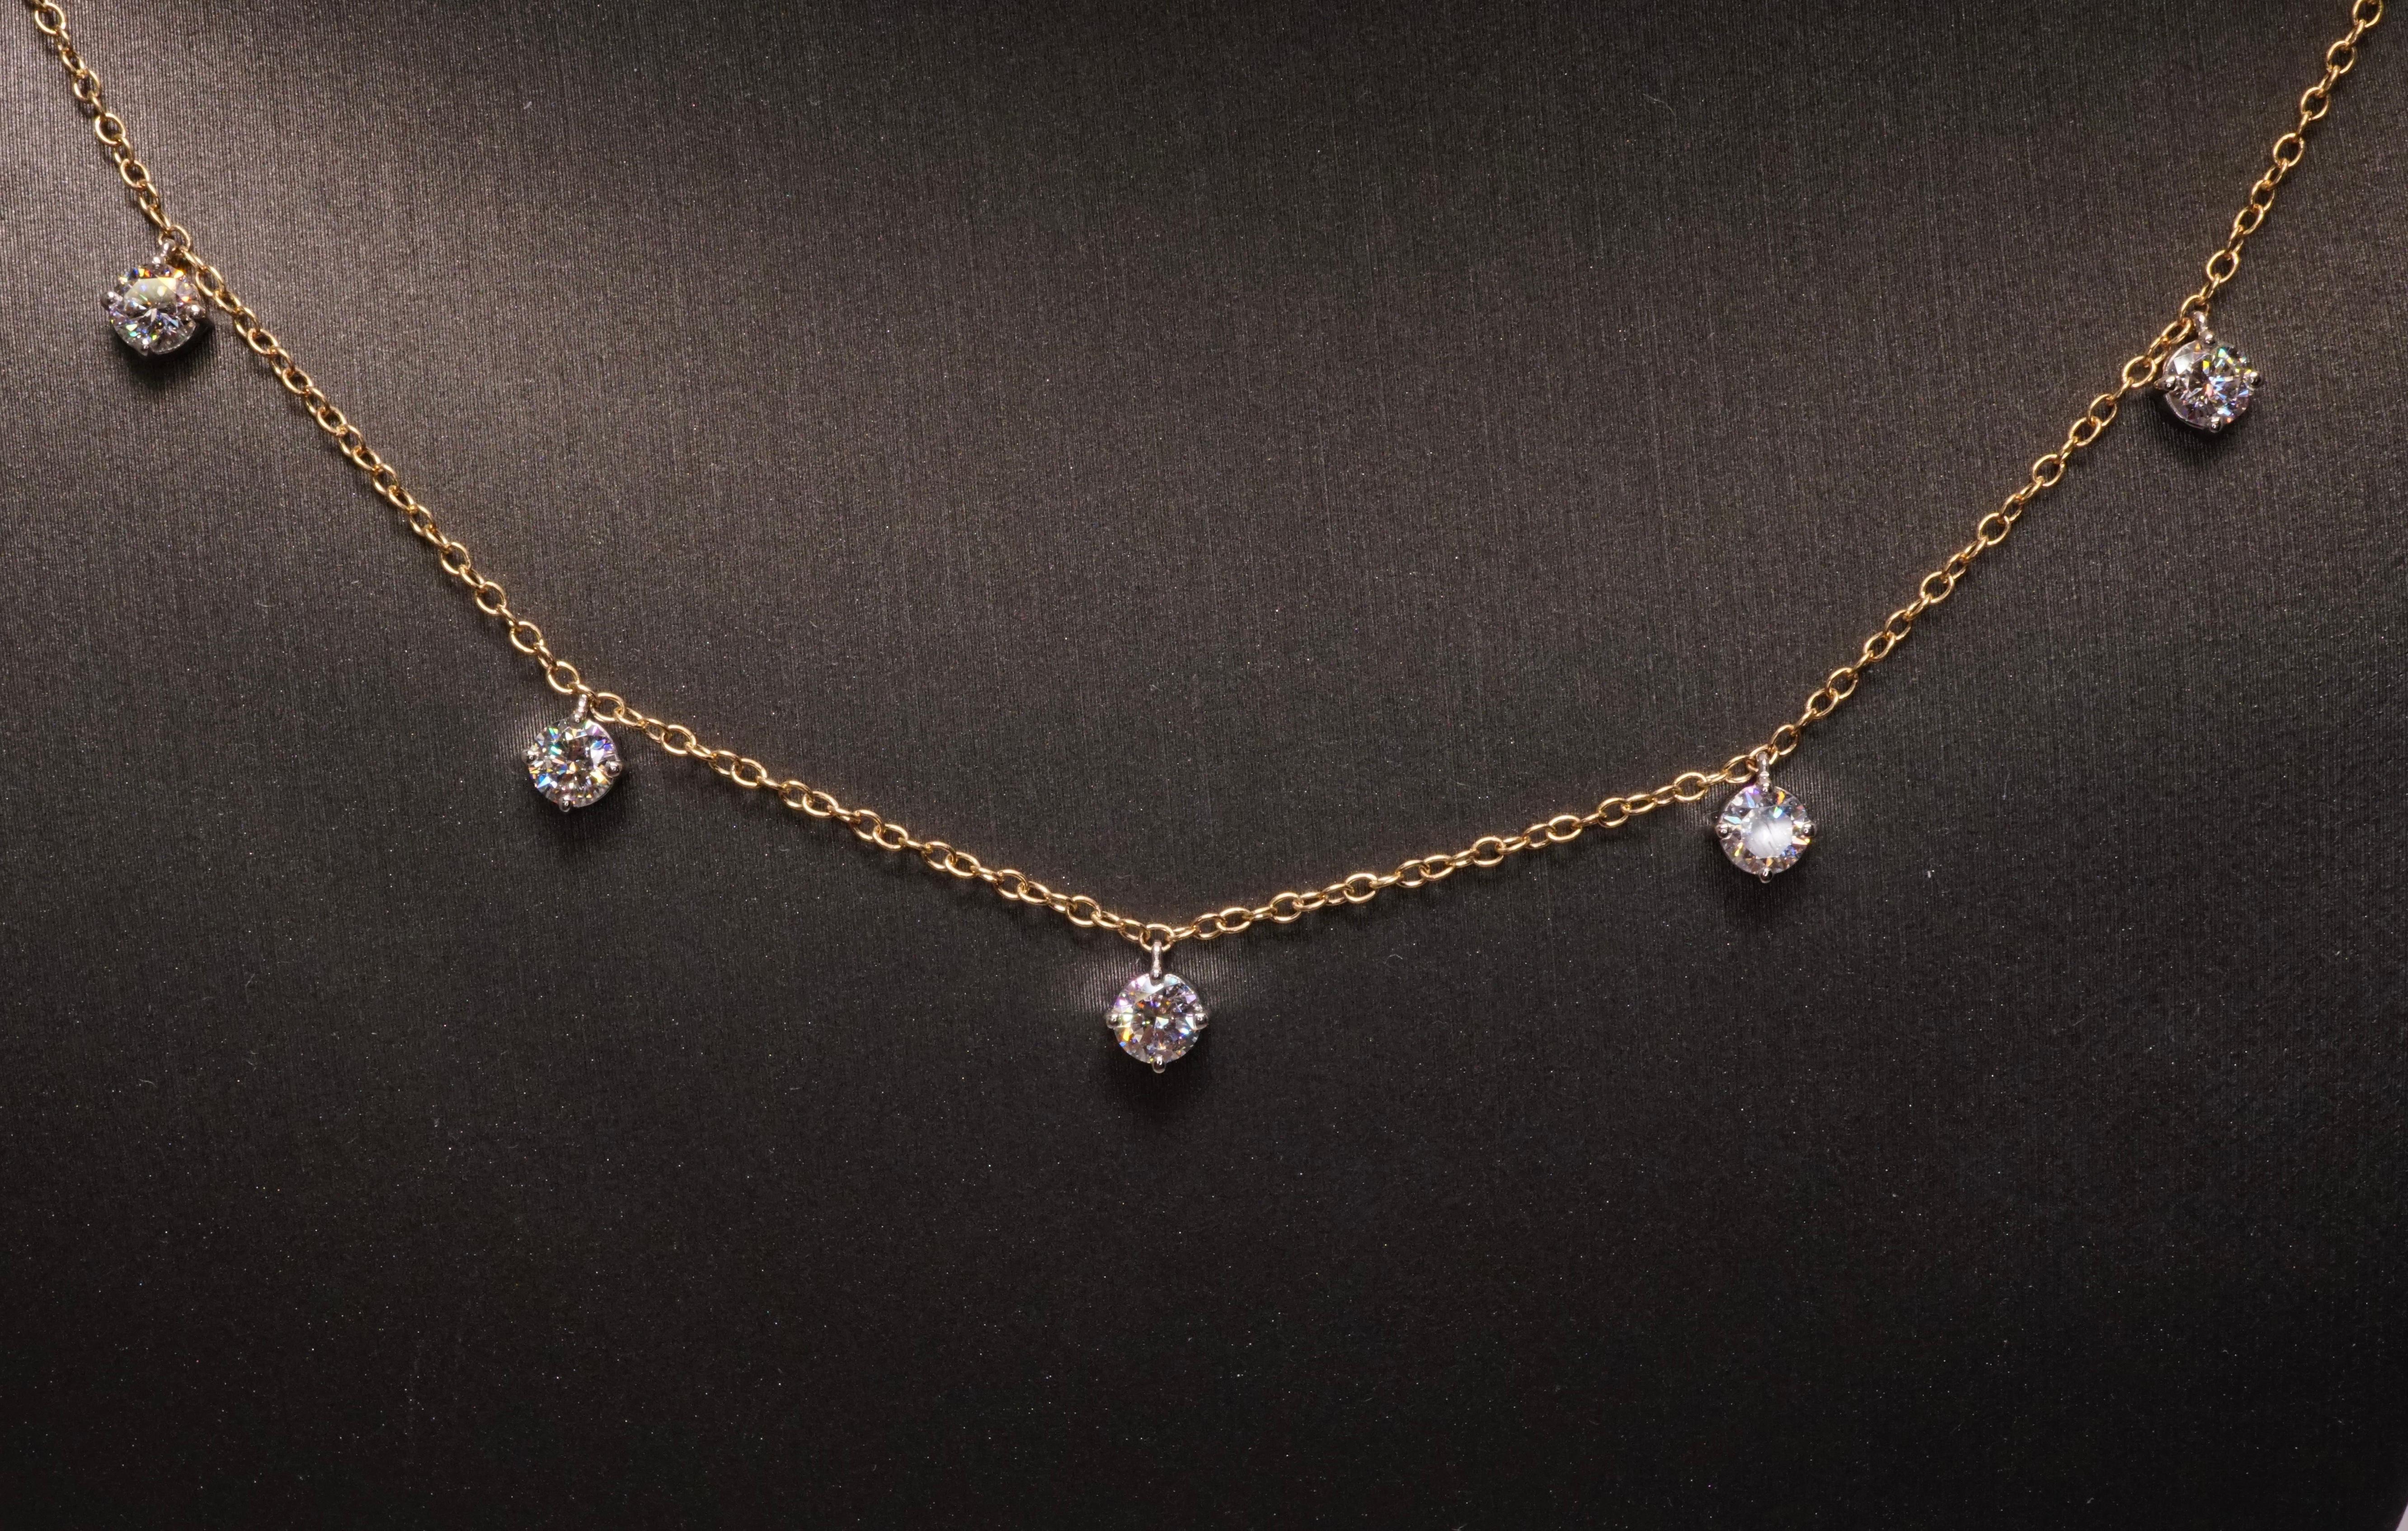 Five round diamonds set in Platinum baskets on 18K Yellow gold chain. Round Brilliant diamonds are F-G VS2-SI1. Total carat weight = 1.25ct. Total weight 3.25 grams. Length is 16